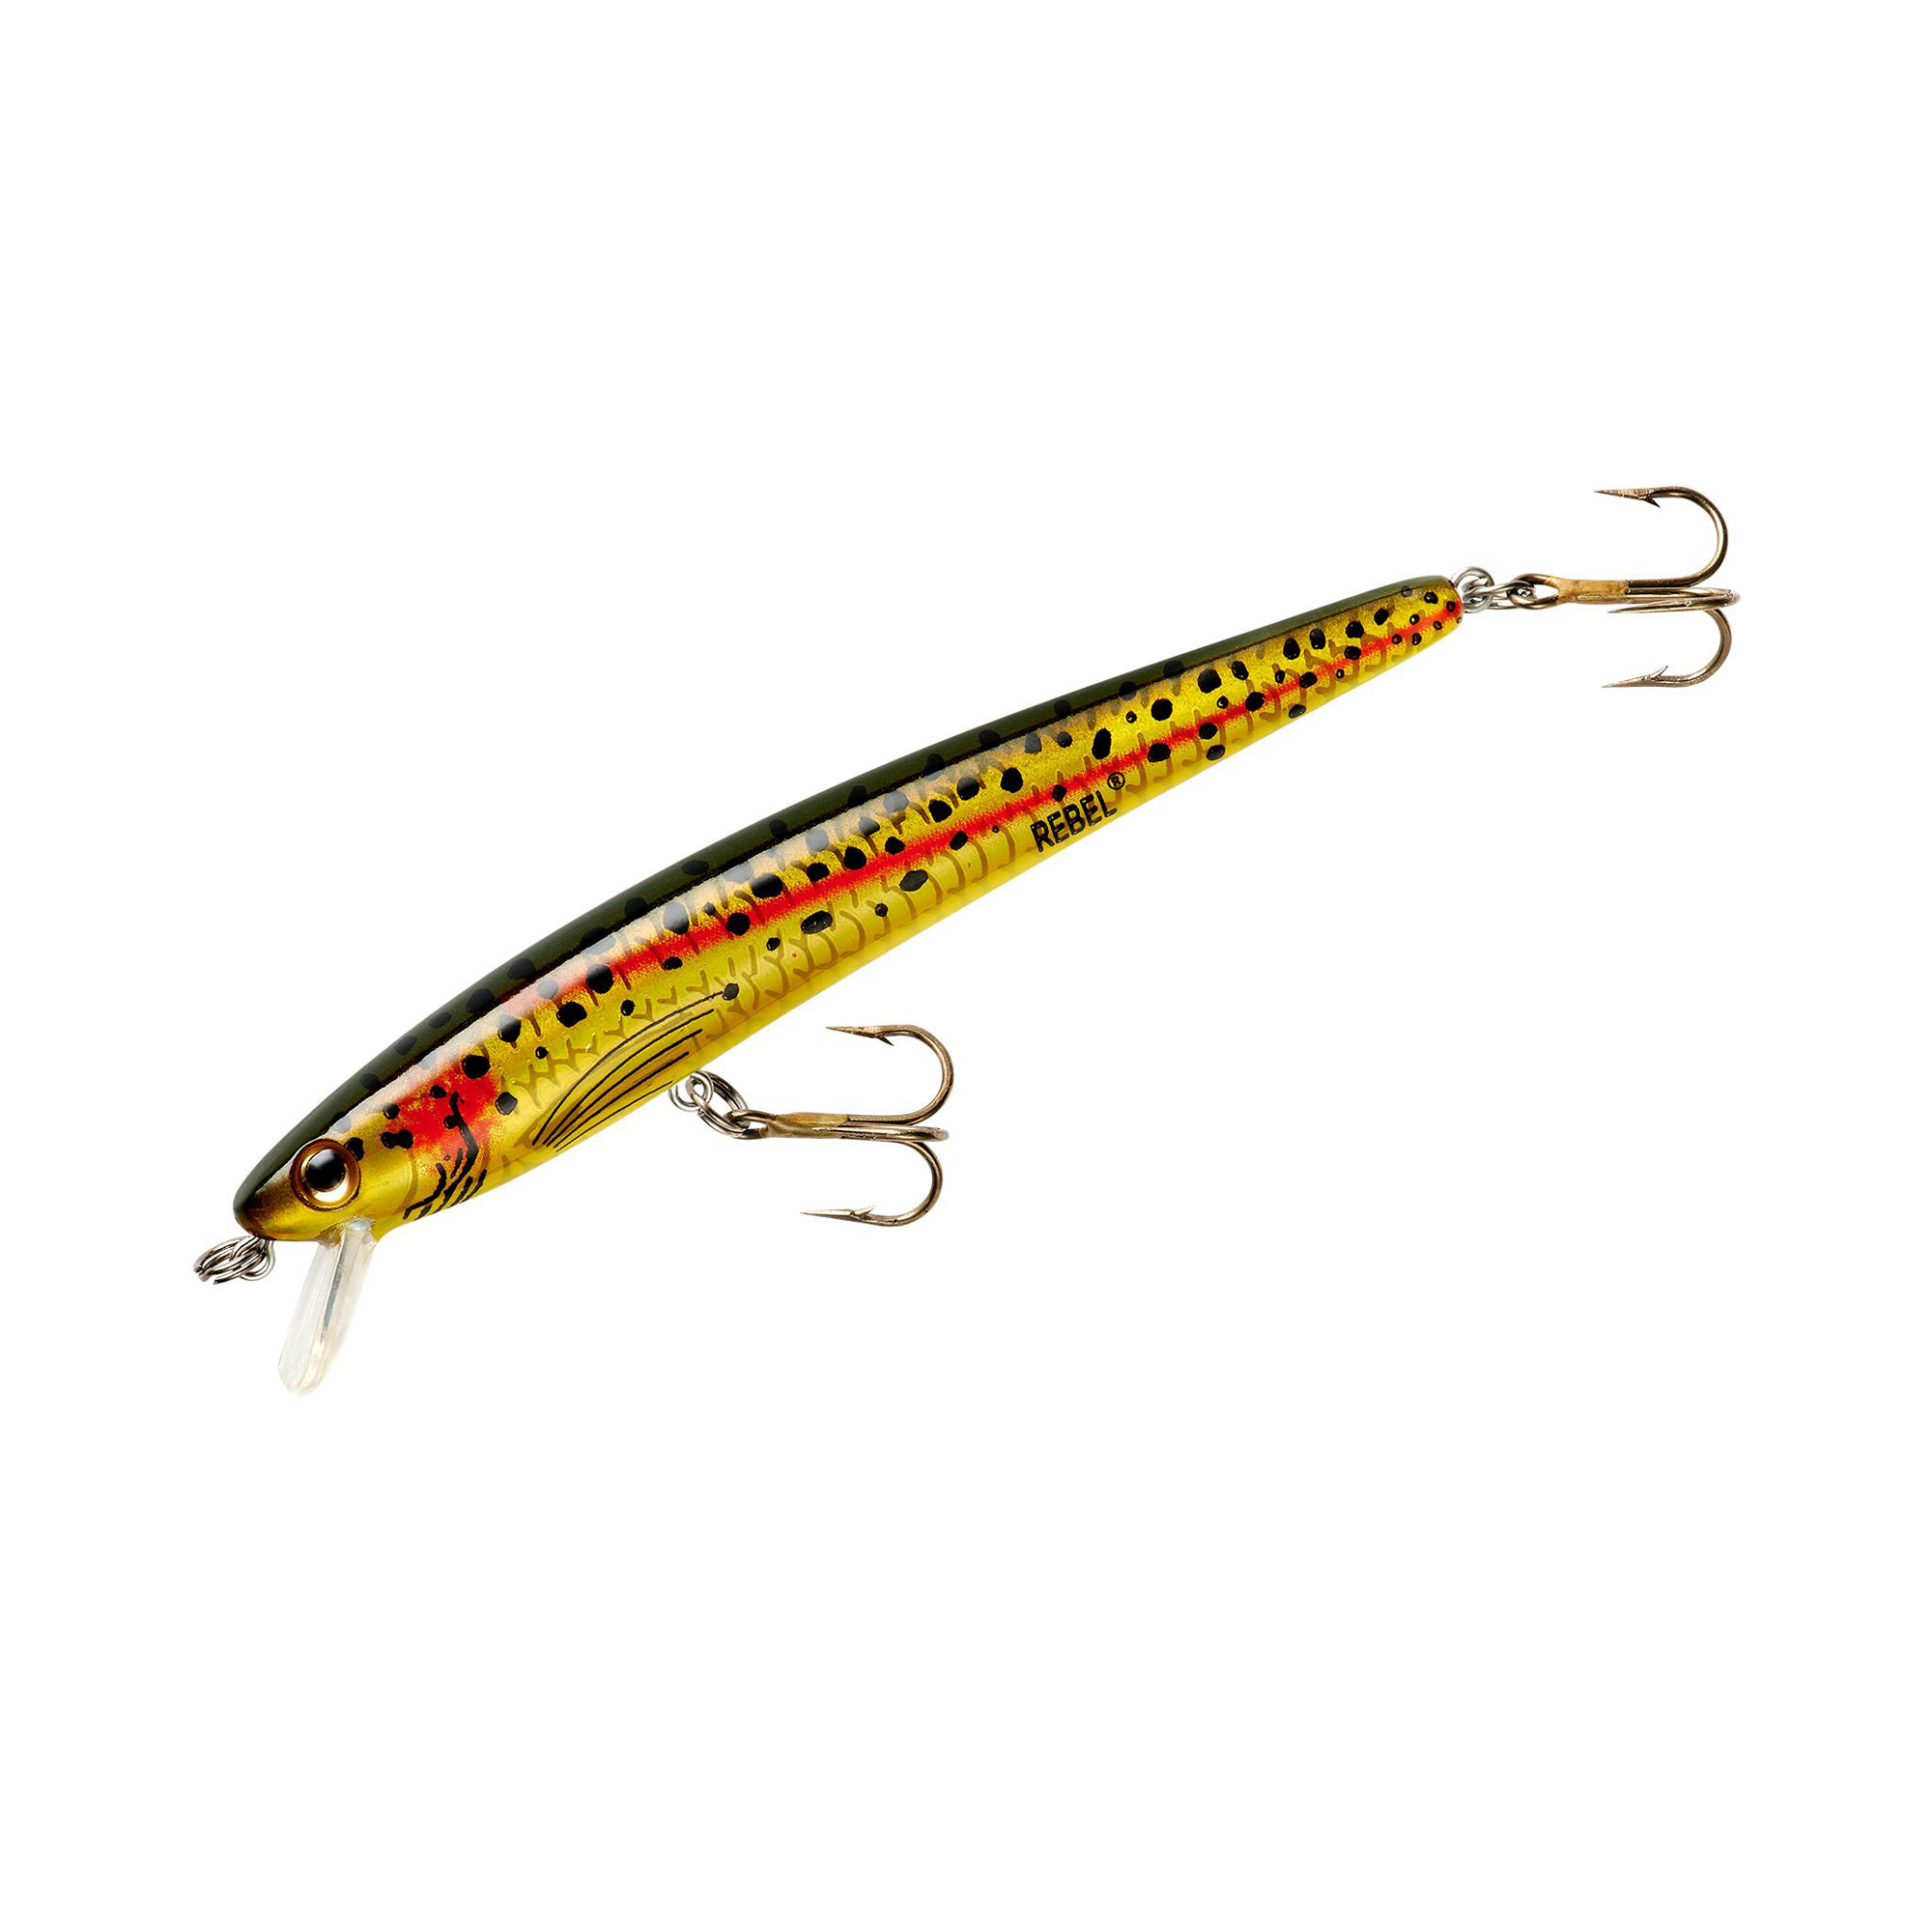 Rebel Lures Tracdown Minnow Slow-Sinking Crankbait Fishing Lure - Great for  Bass, Trout and Walleye